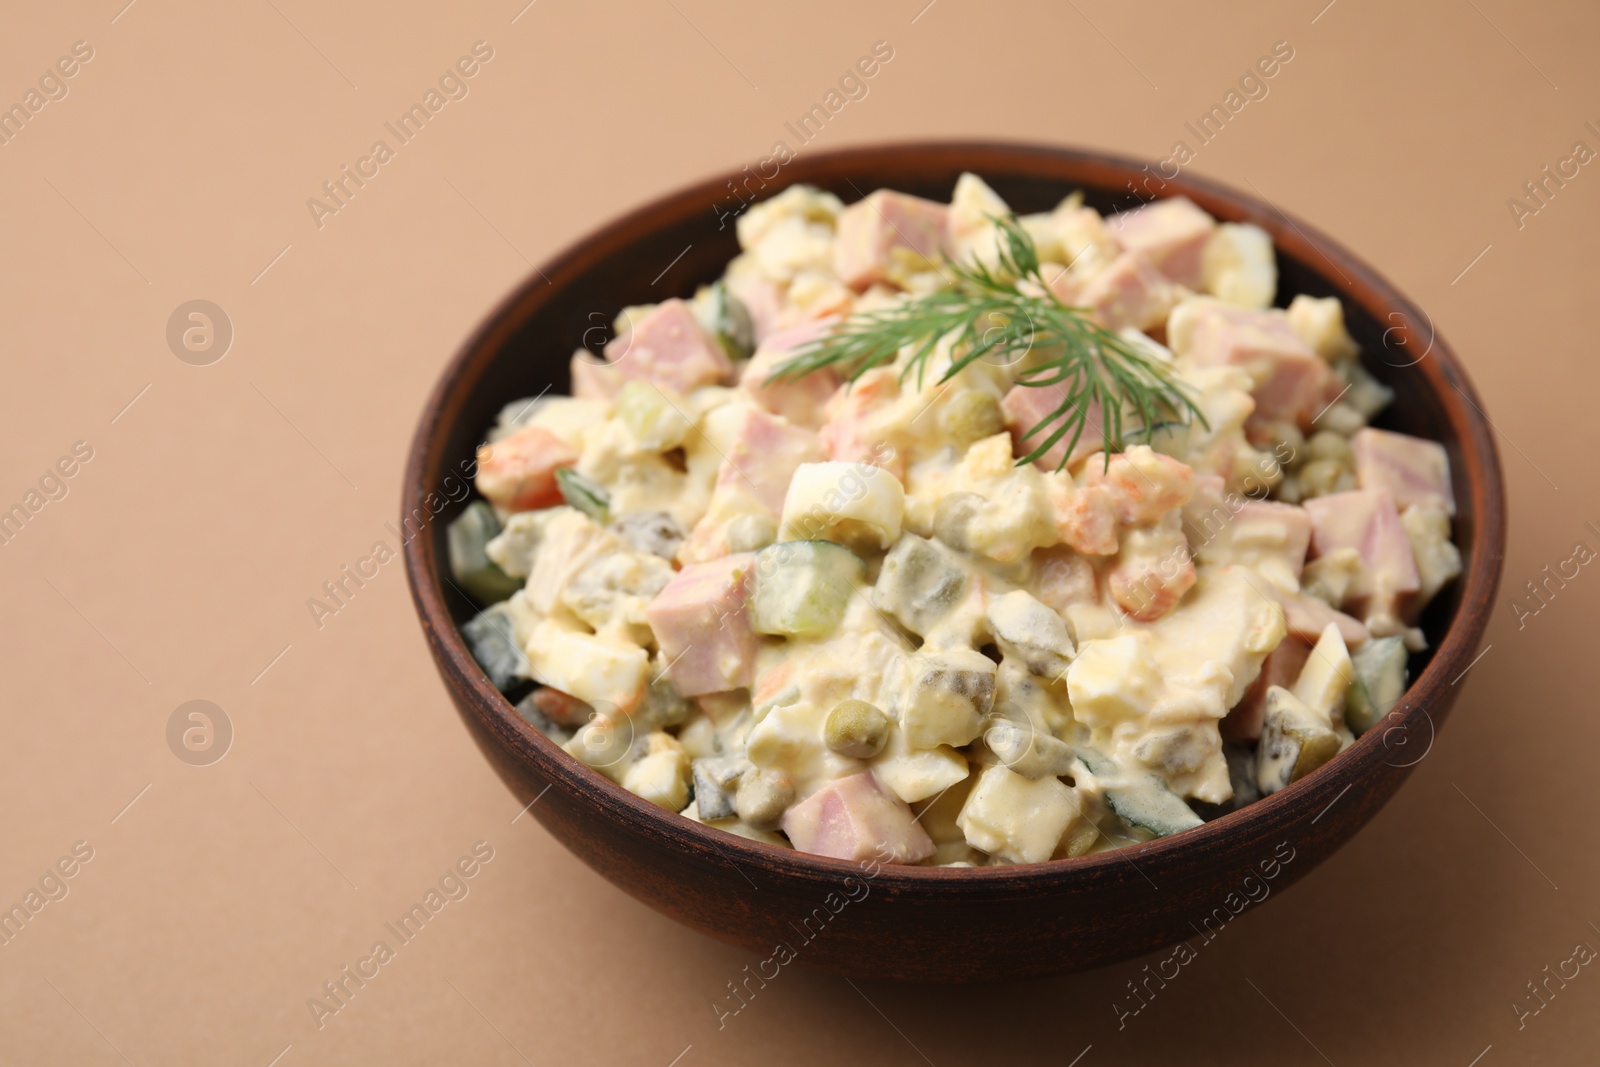 Photo of Tasty Olivier salad with boiled sausage in bowl on beige table